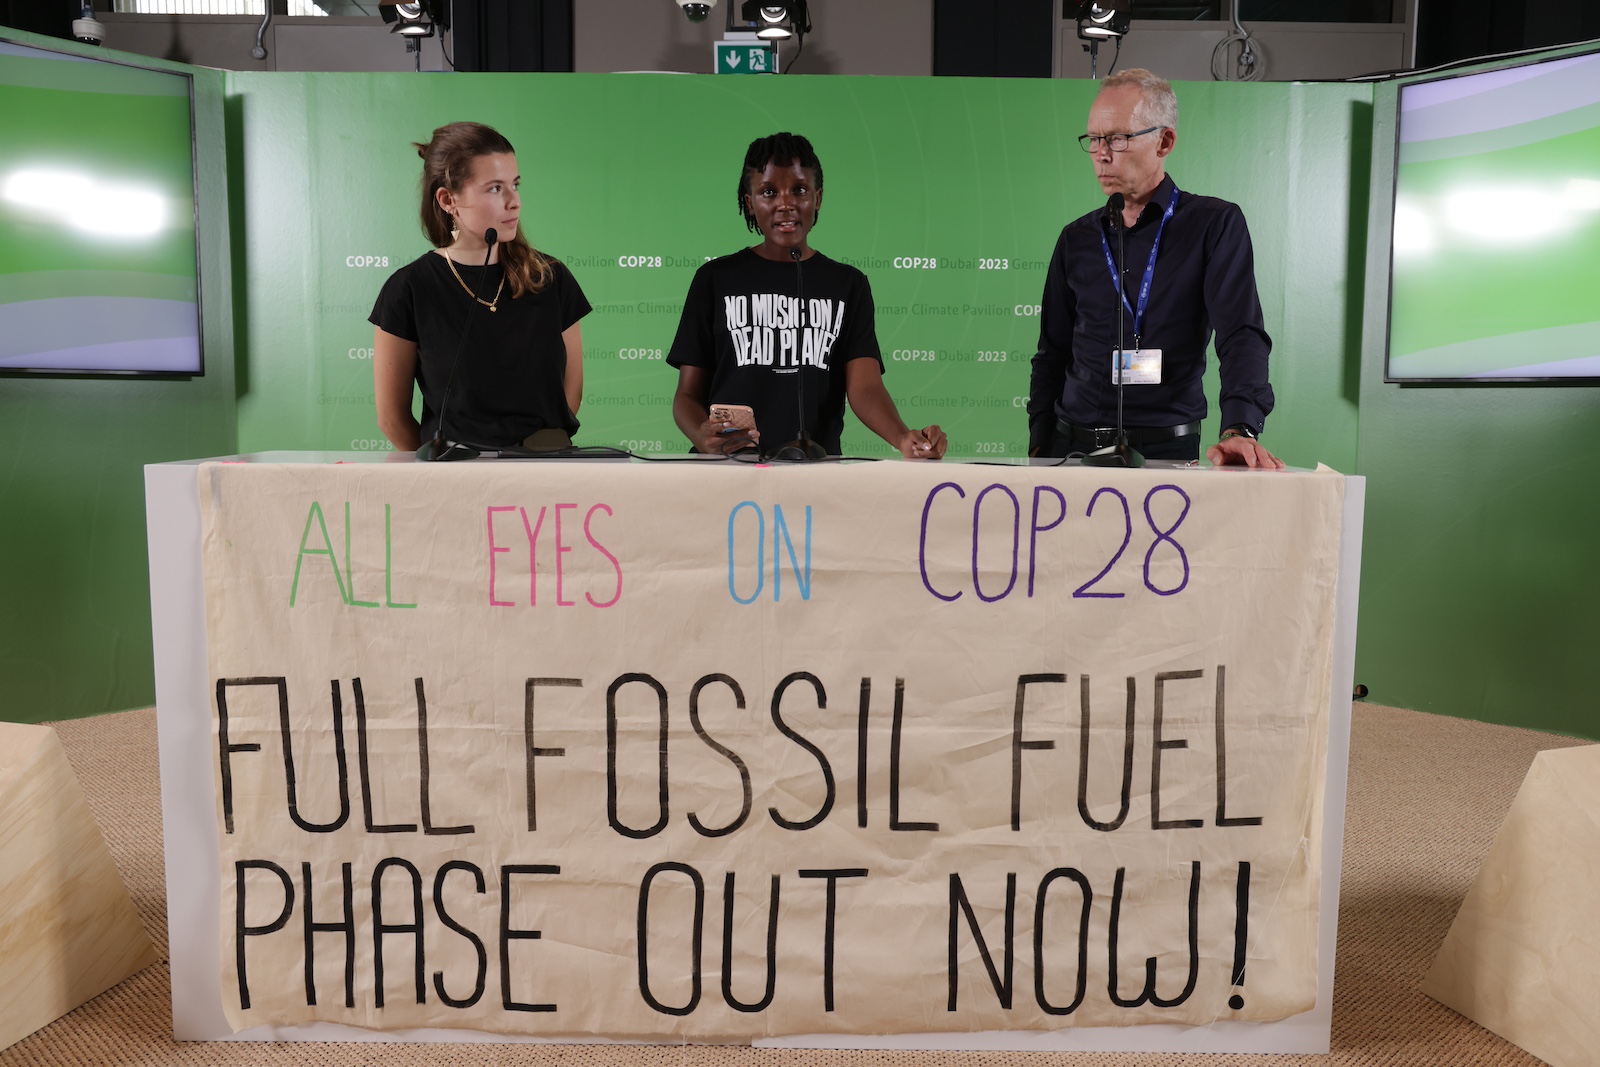 Leaked Documents Have Revealed The UAE Planned To Use COP28 To Make Oil Deals